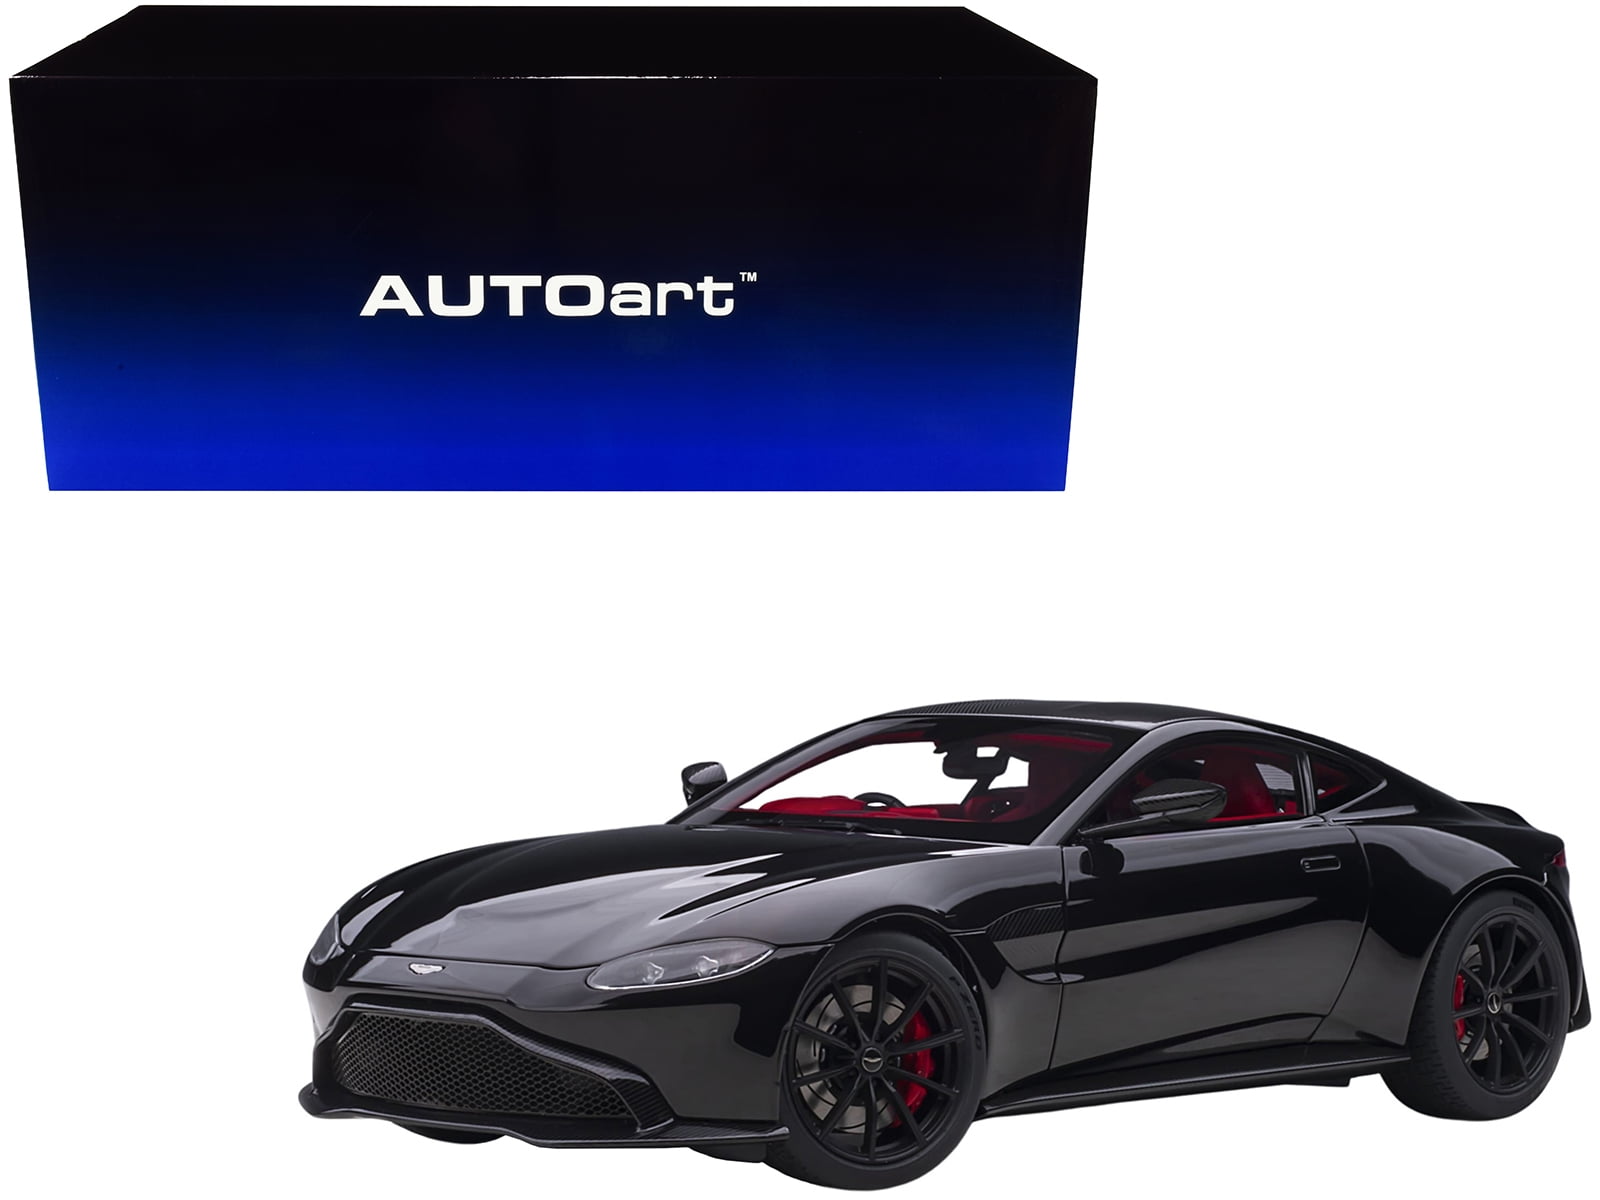 Picture of Autoart 70275 Jet Black with Red Interior 1 by 18 Scale Model Car for 2019 Aston Martin Vantage RHD